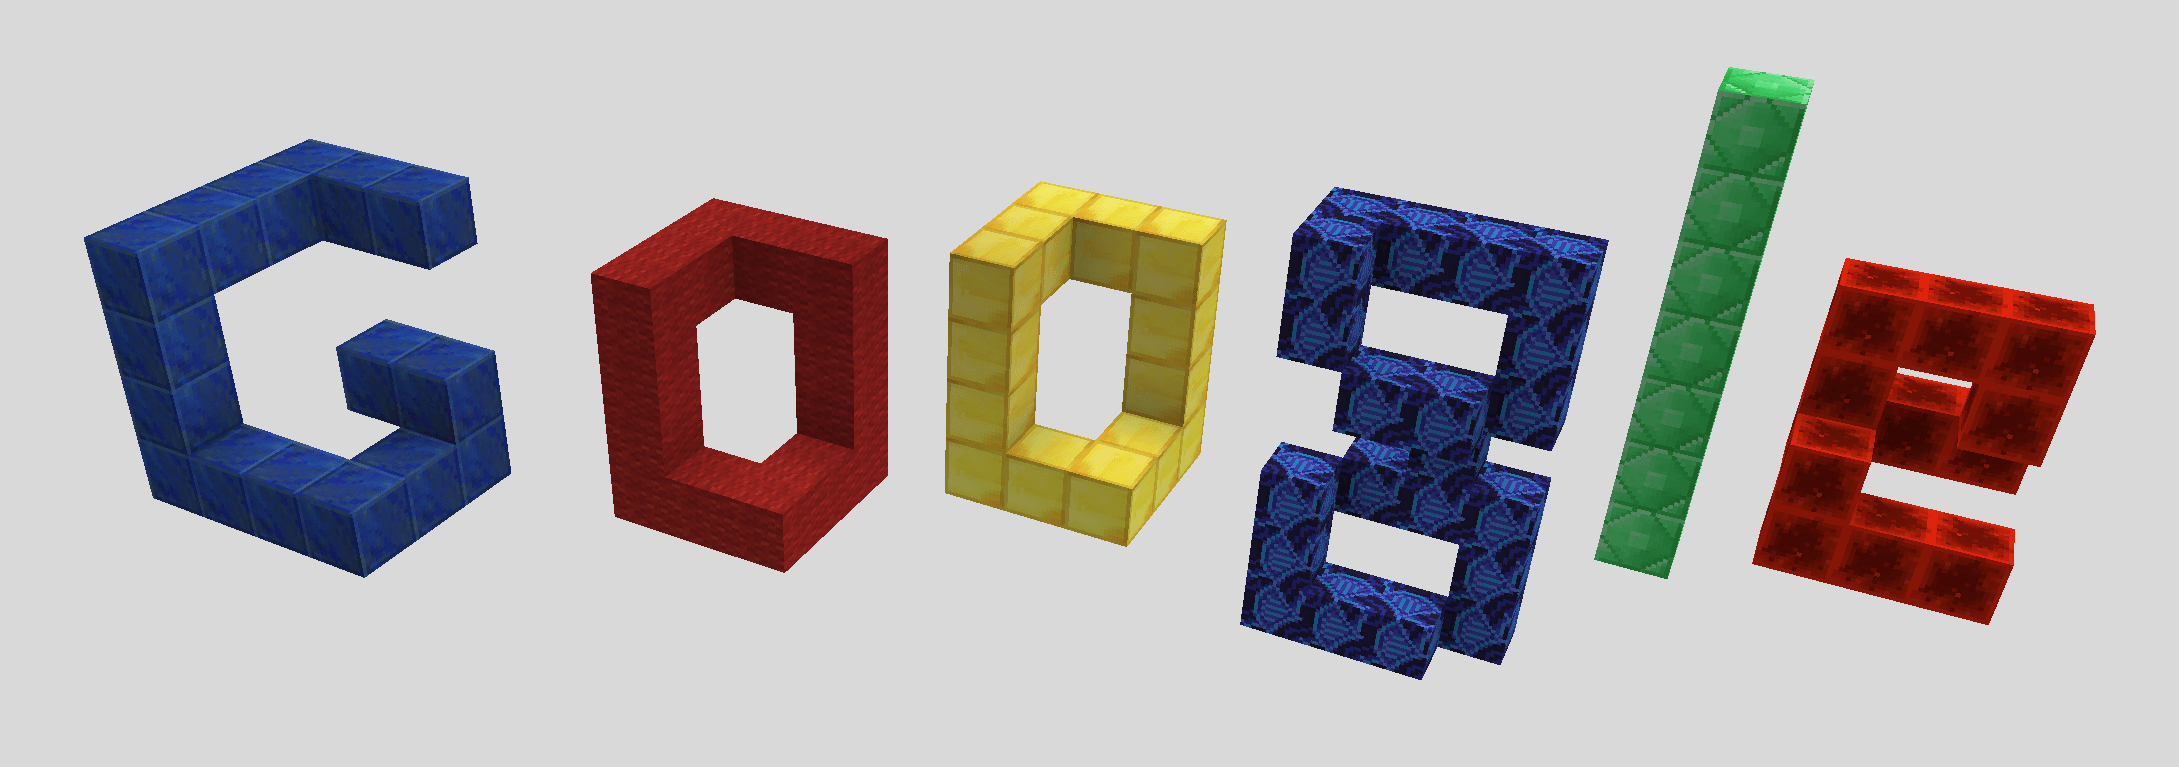 Micraft Logo - Yet another Google logo done in Minecraft